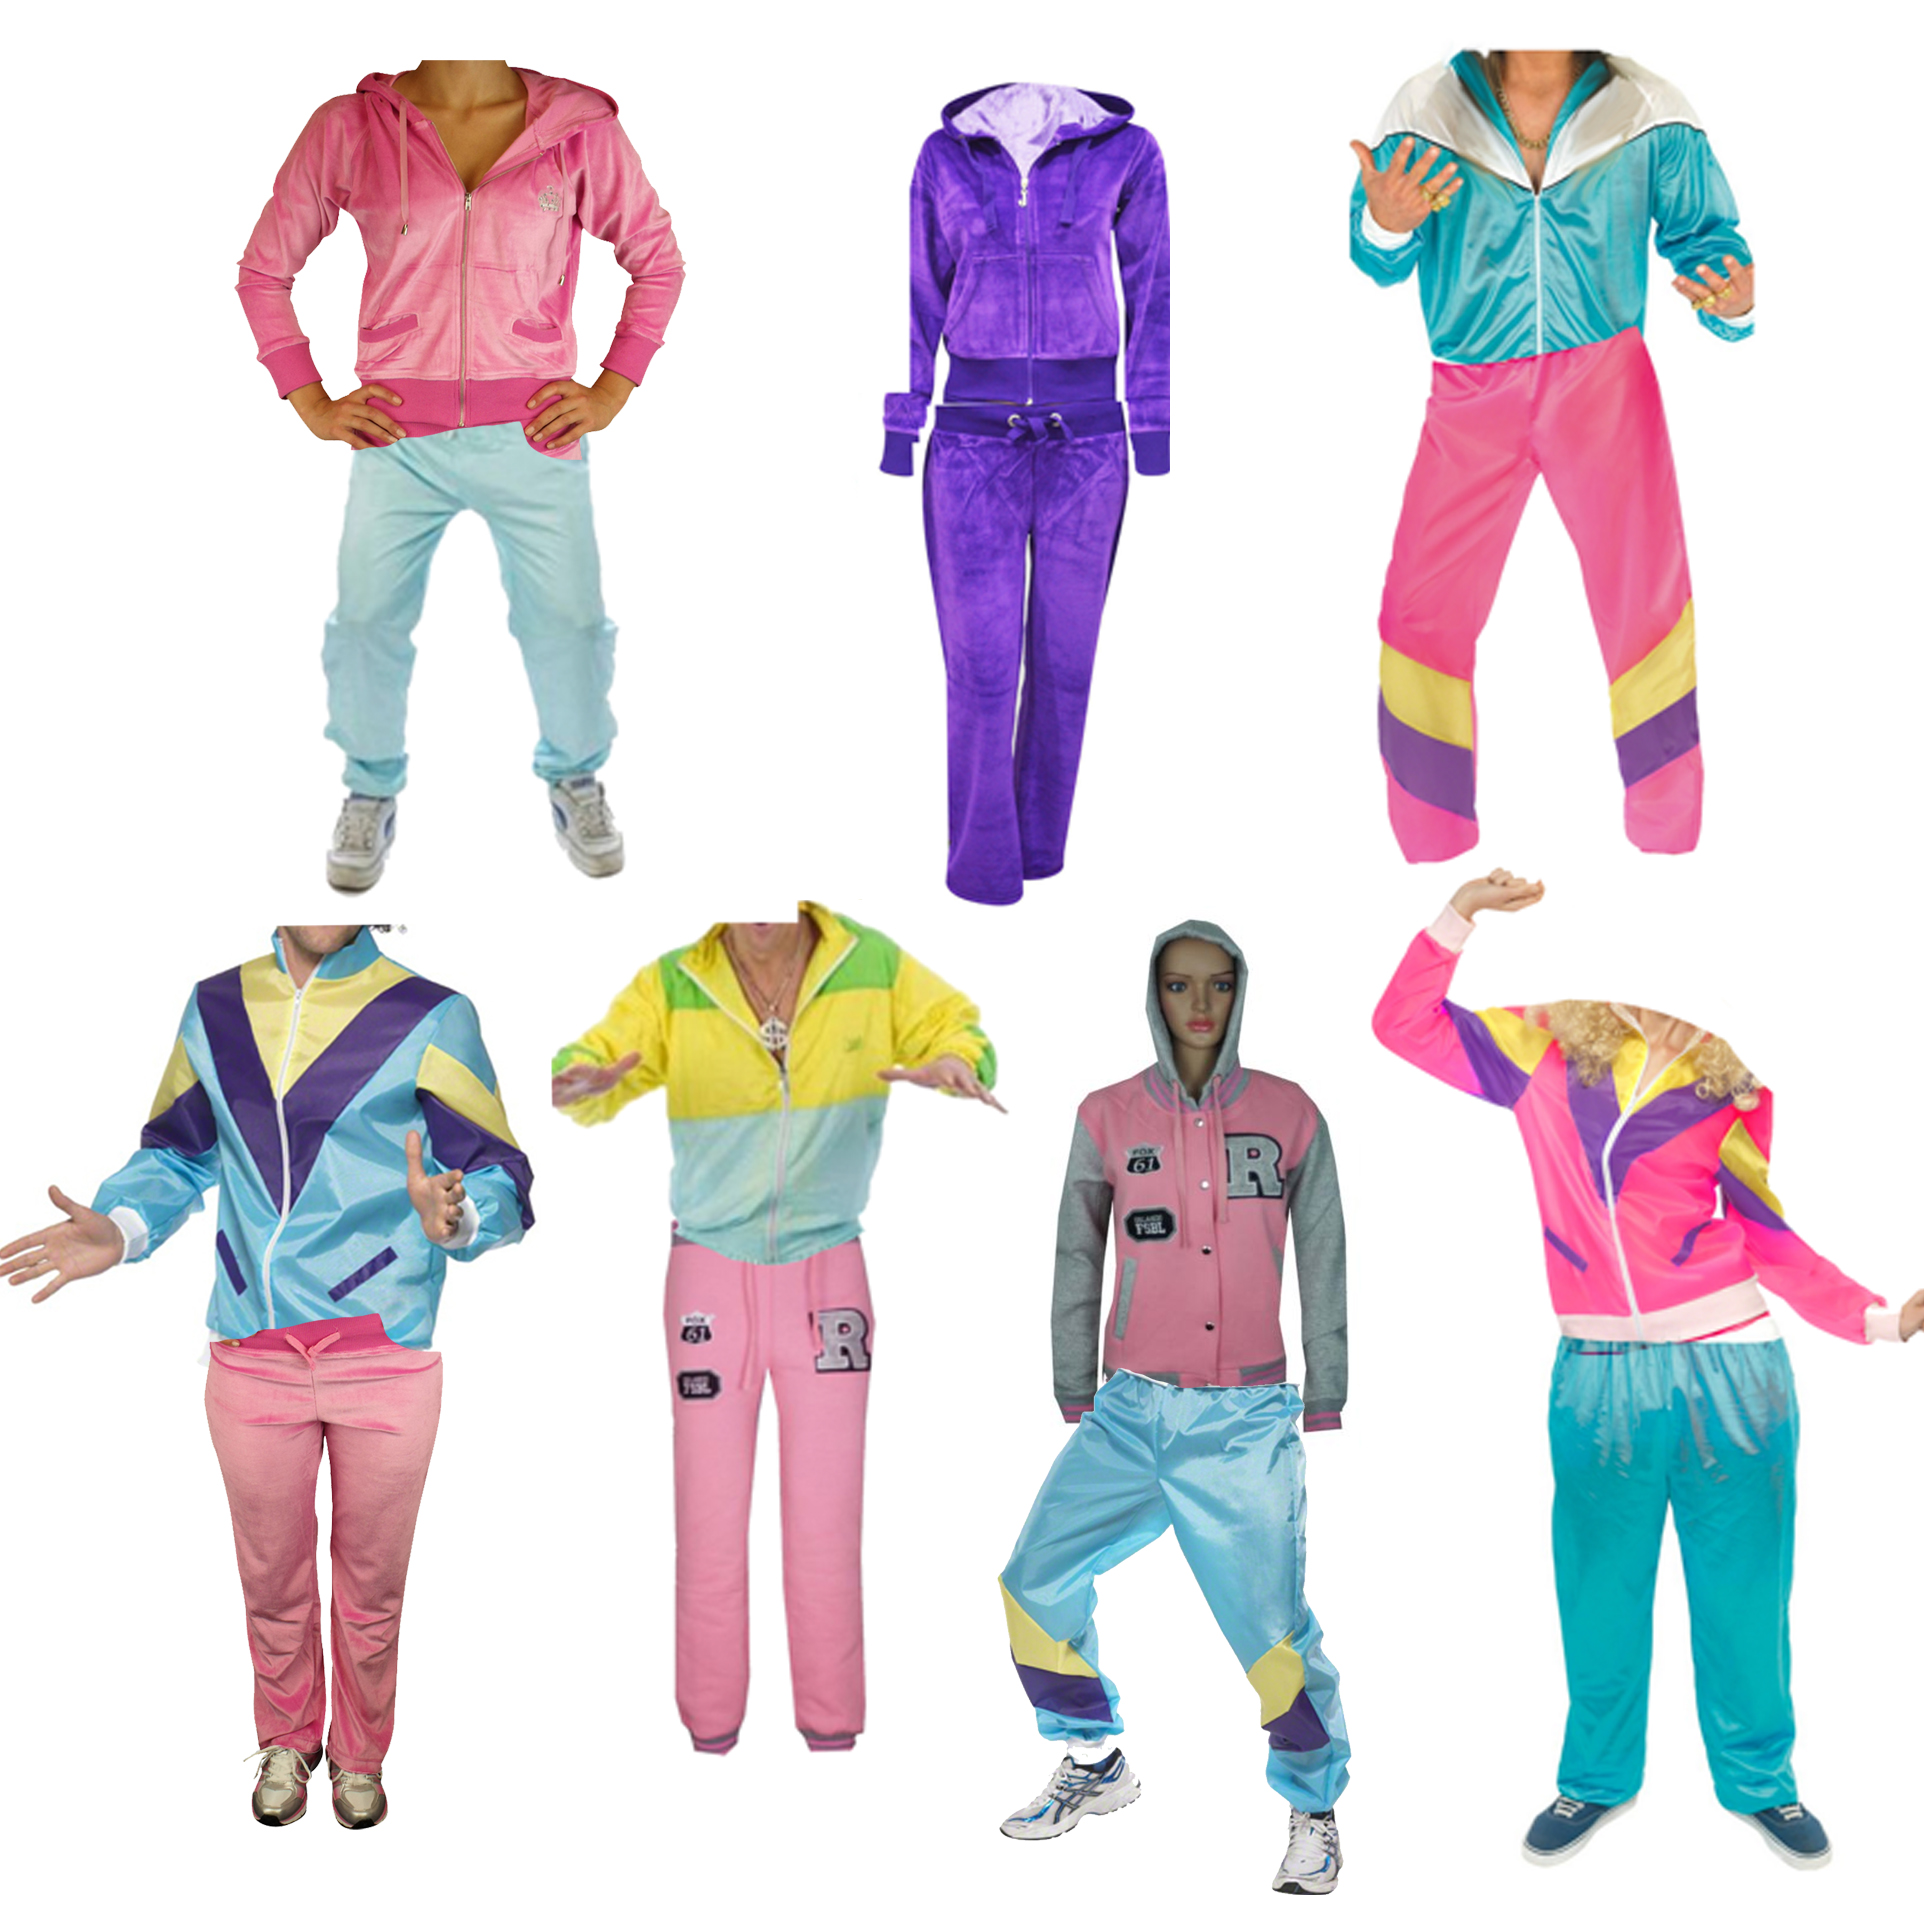 tracksuit combinations - Dice Productions